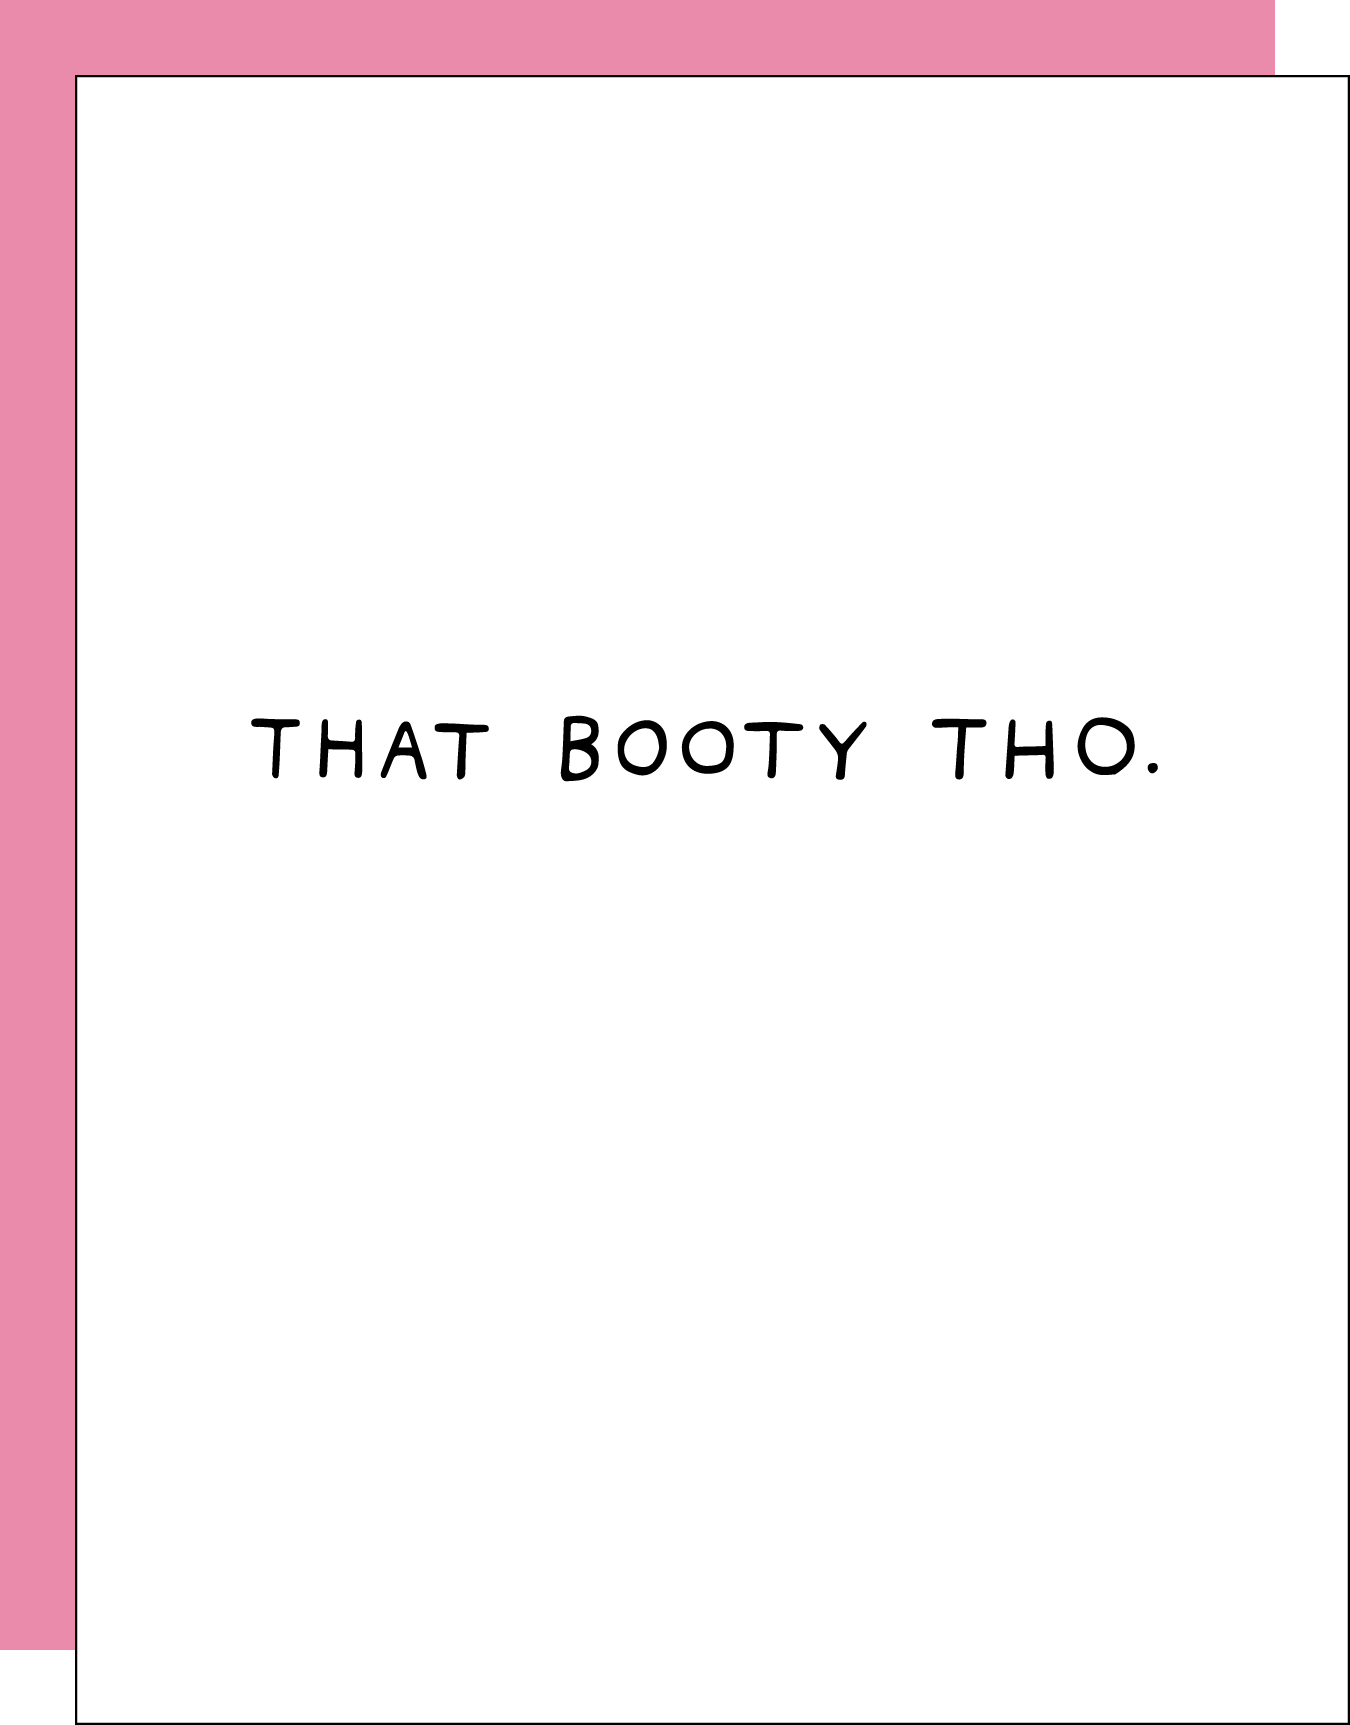 That Booty Tho Card